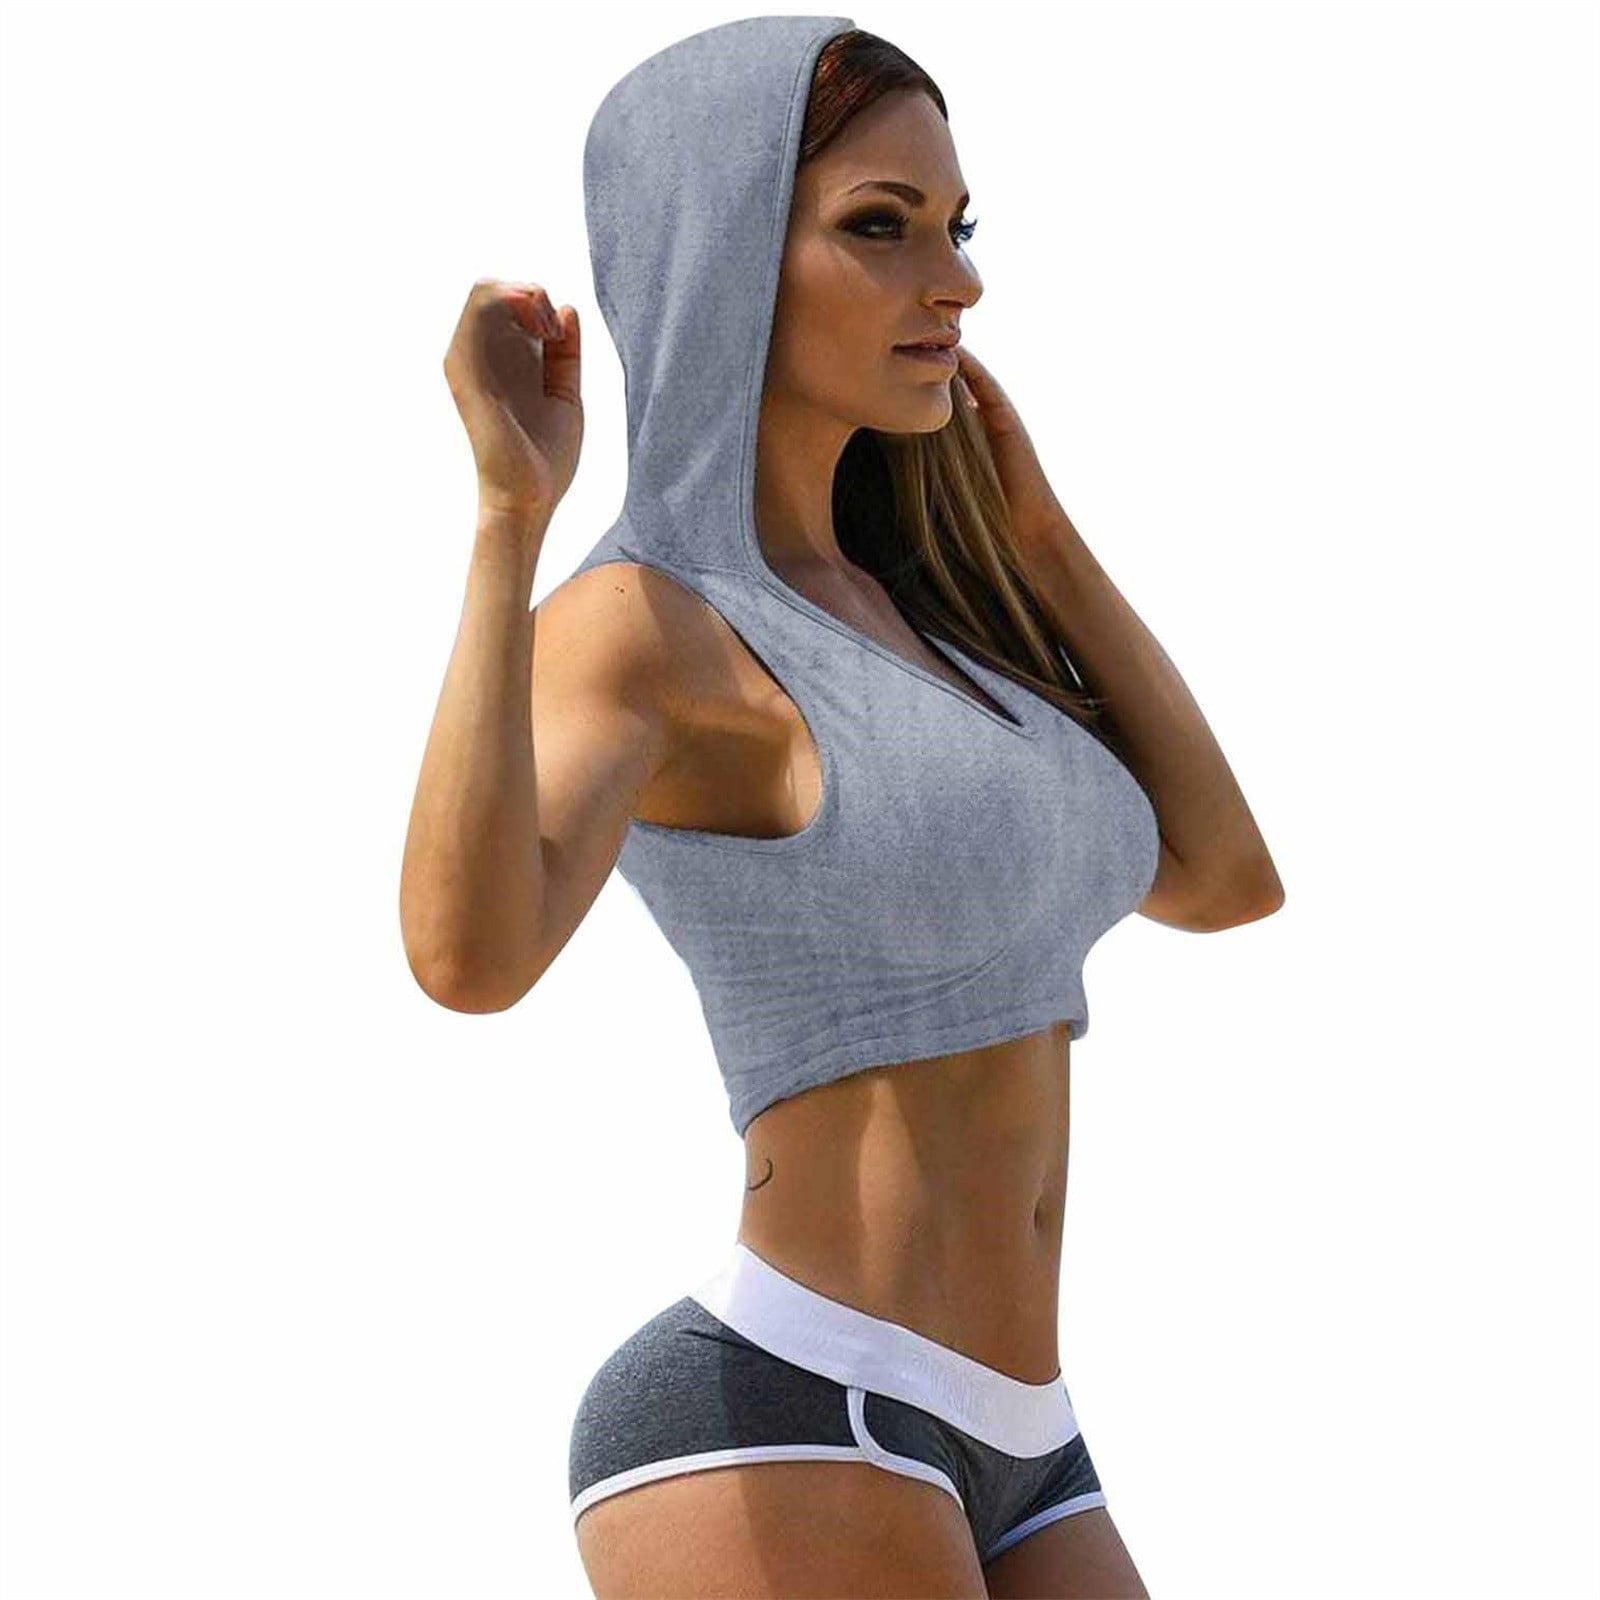 Athletic Hooded Tank Top for Women Activewear Crop Top Sleeveless